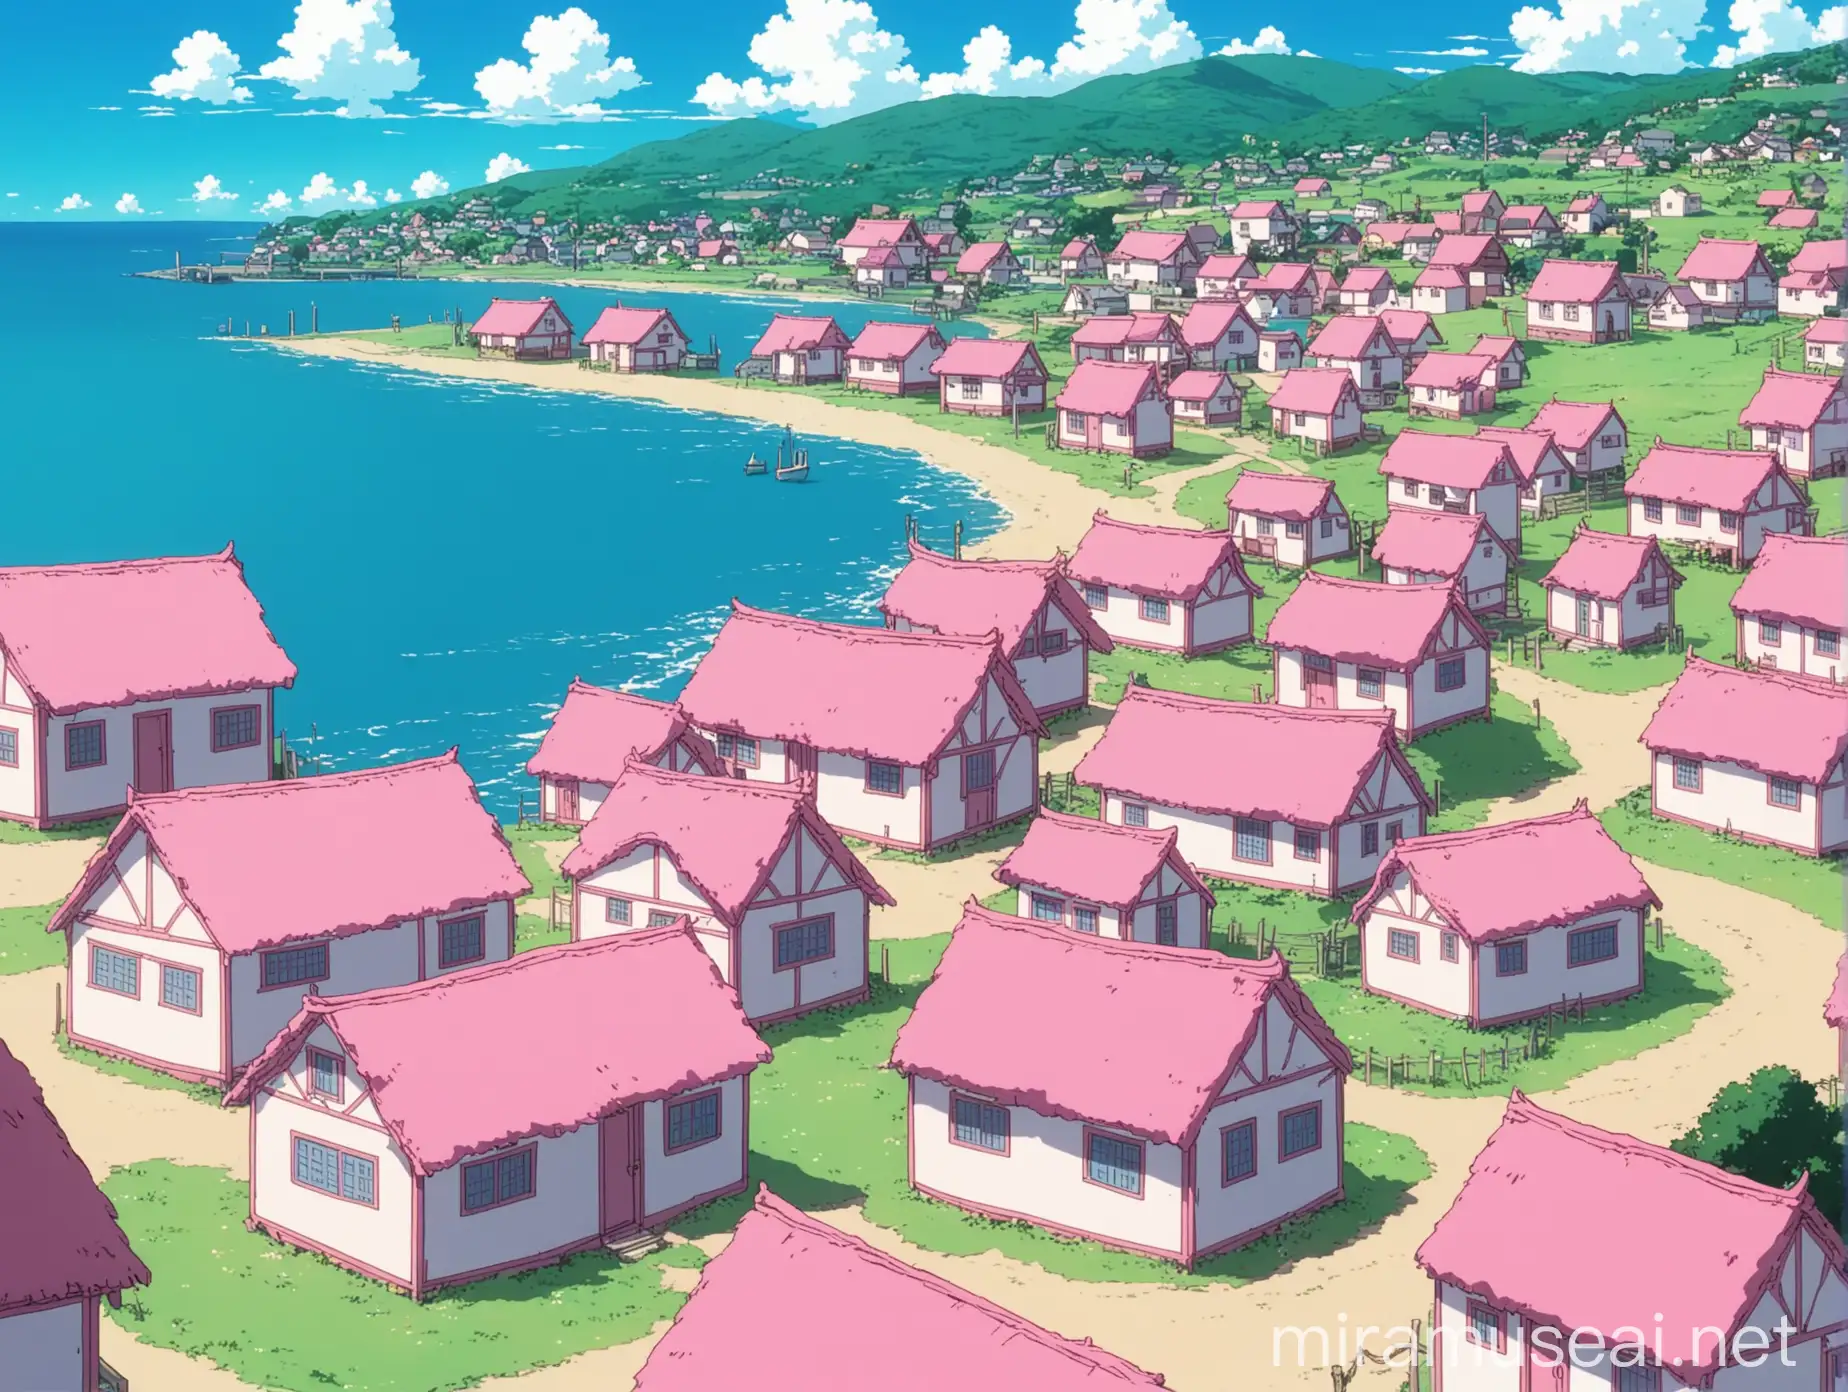 Pink Anime Village by the Sea